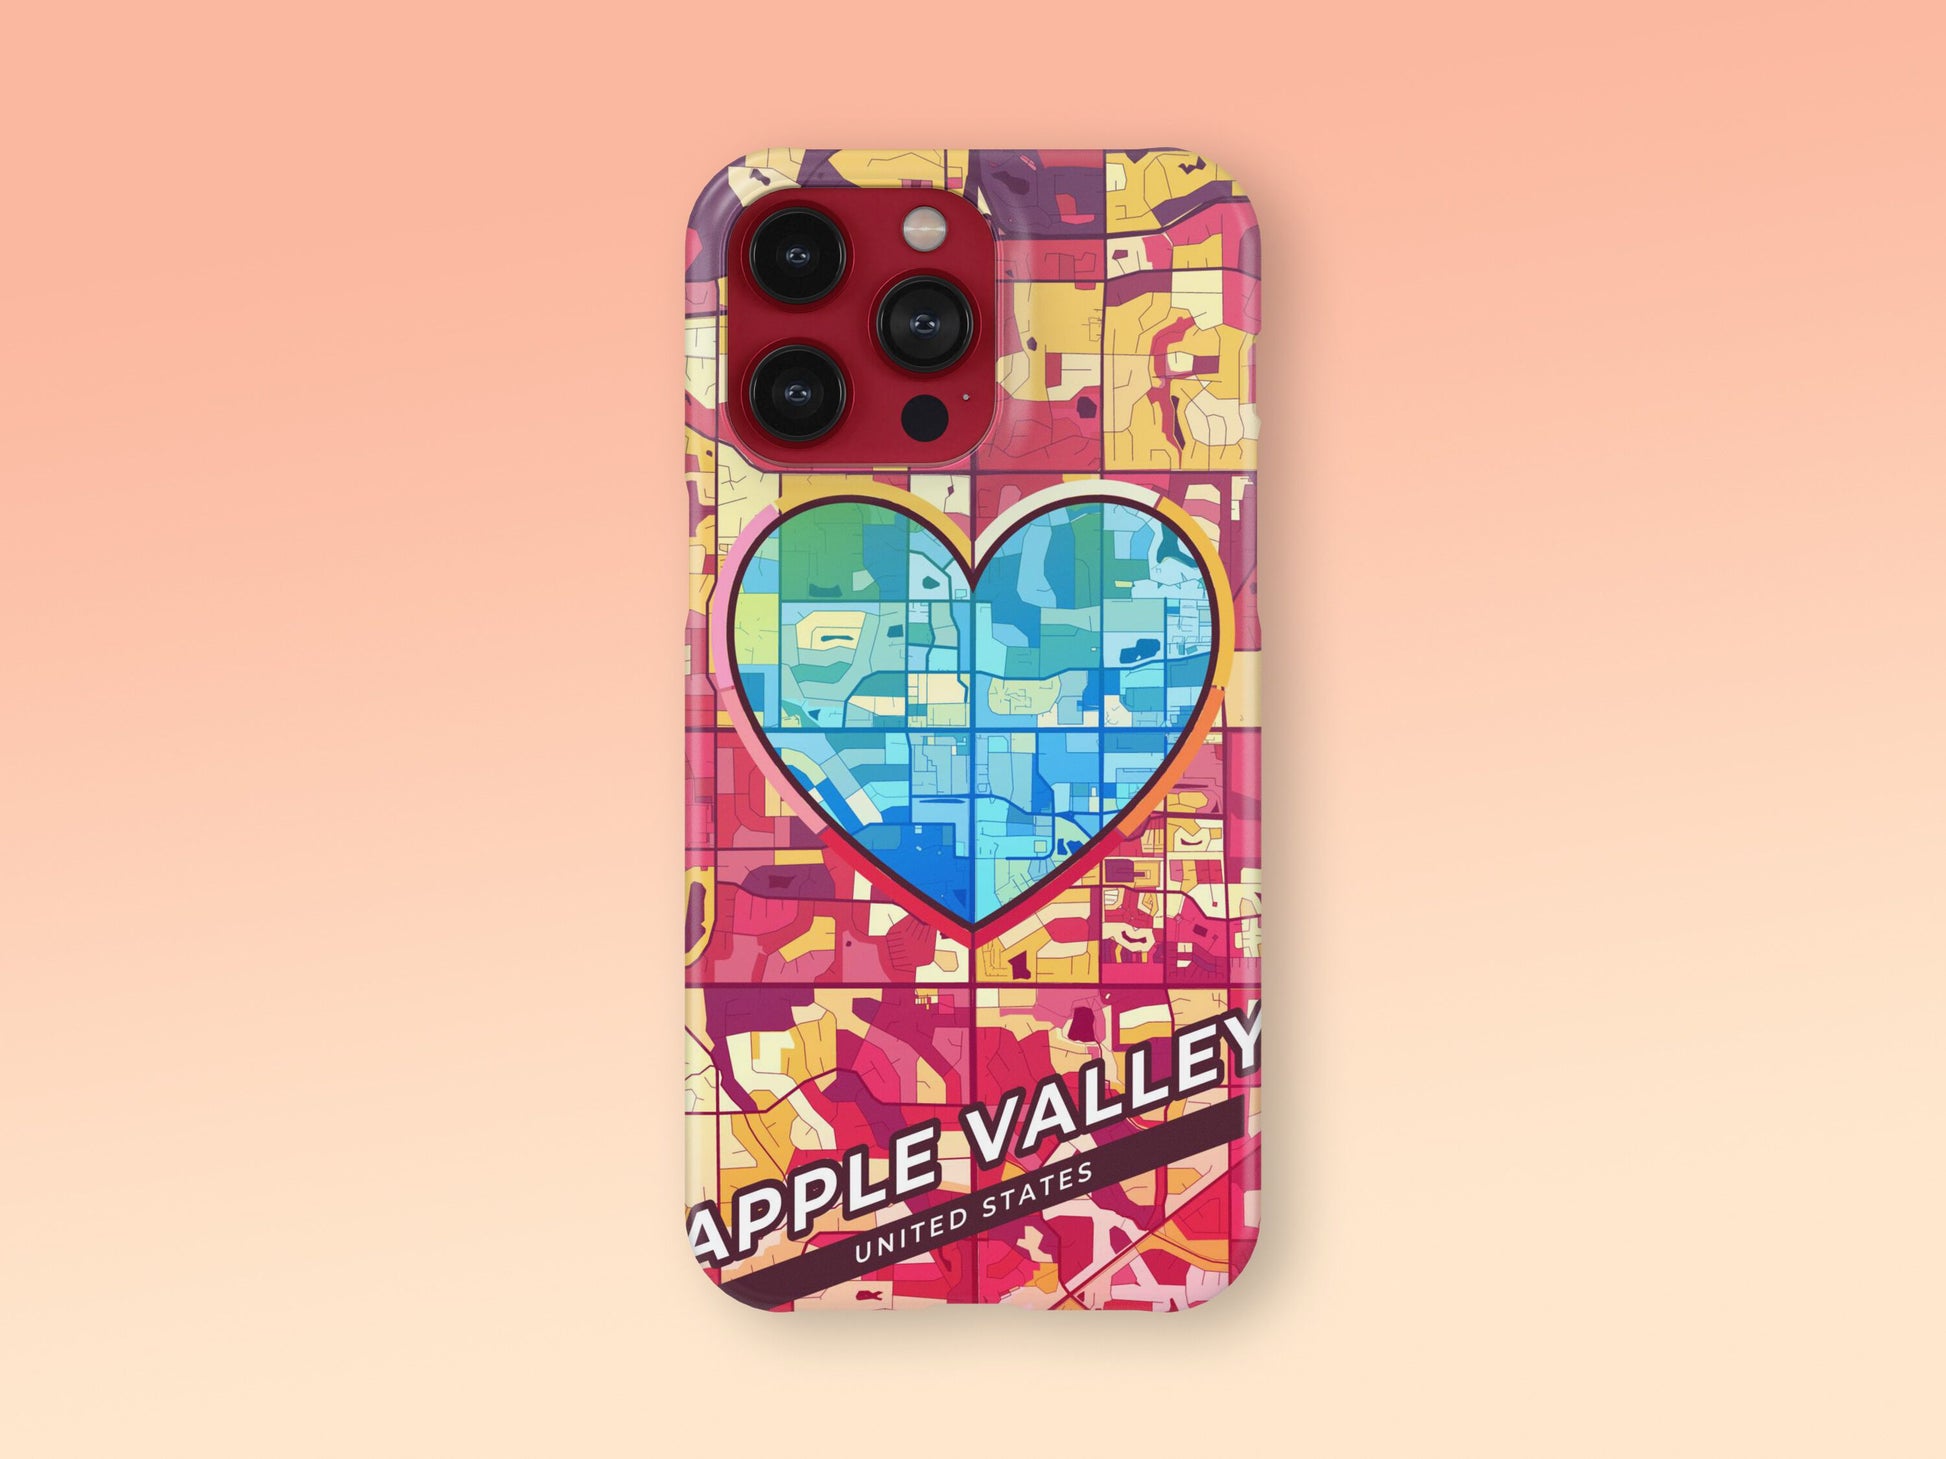 Apple Valley Minnesota slim phone case with colorful icon. Birthday, wedding or housewarming gift. Couple match cases. 2